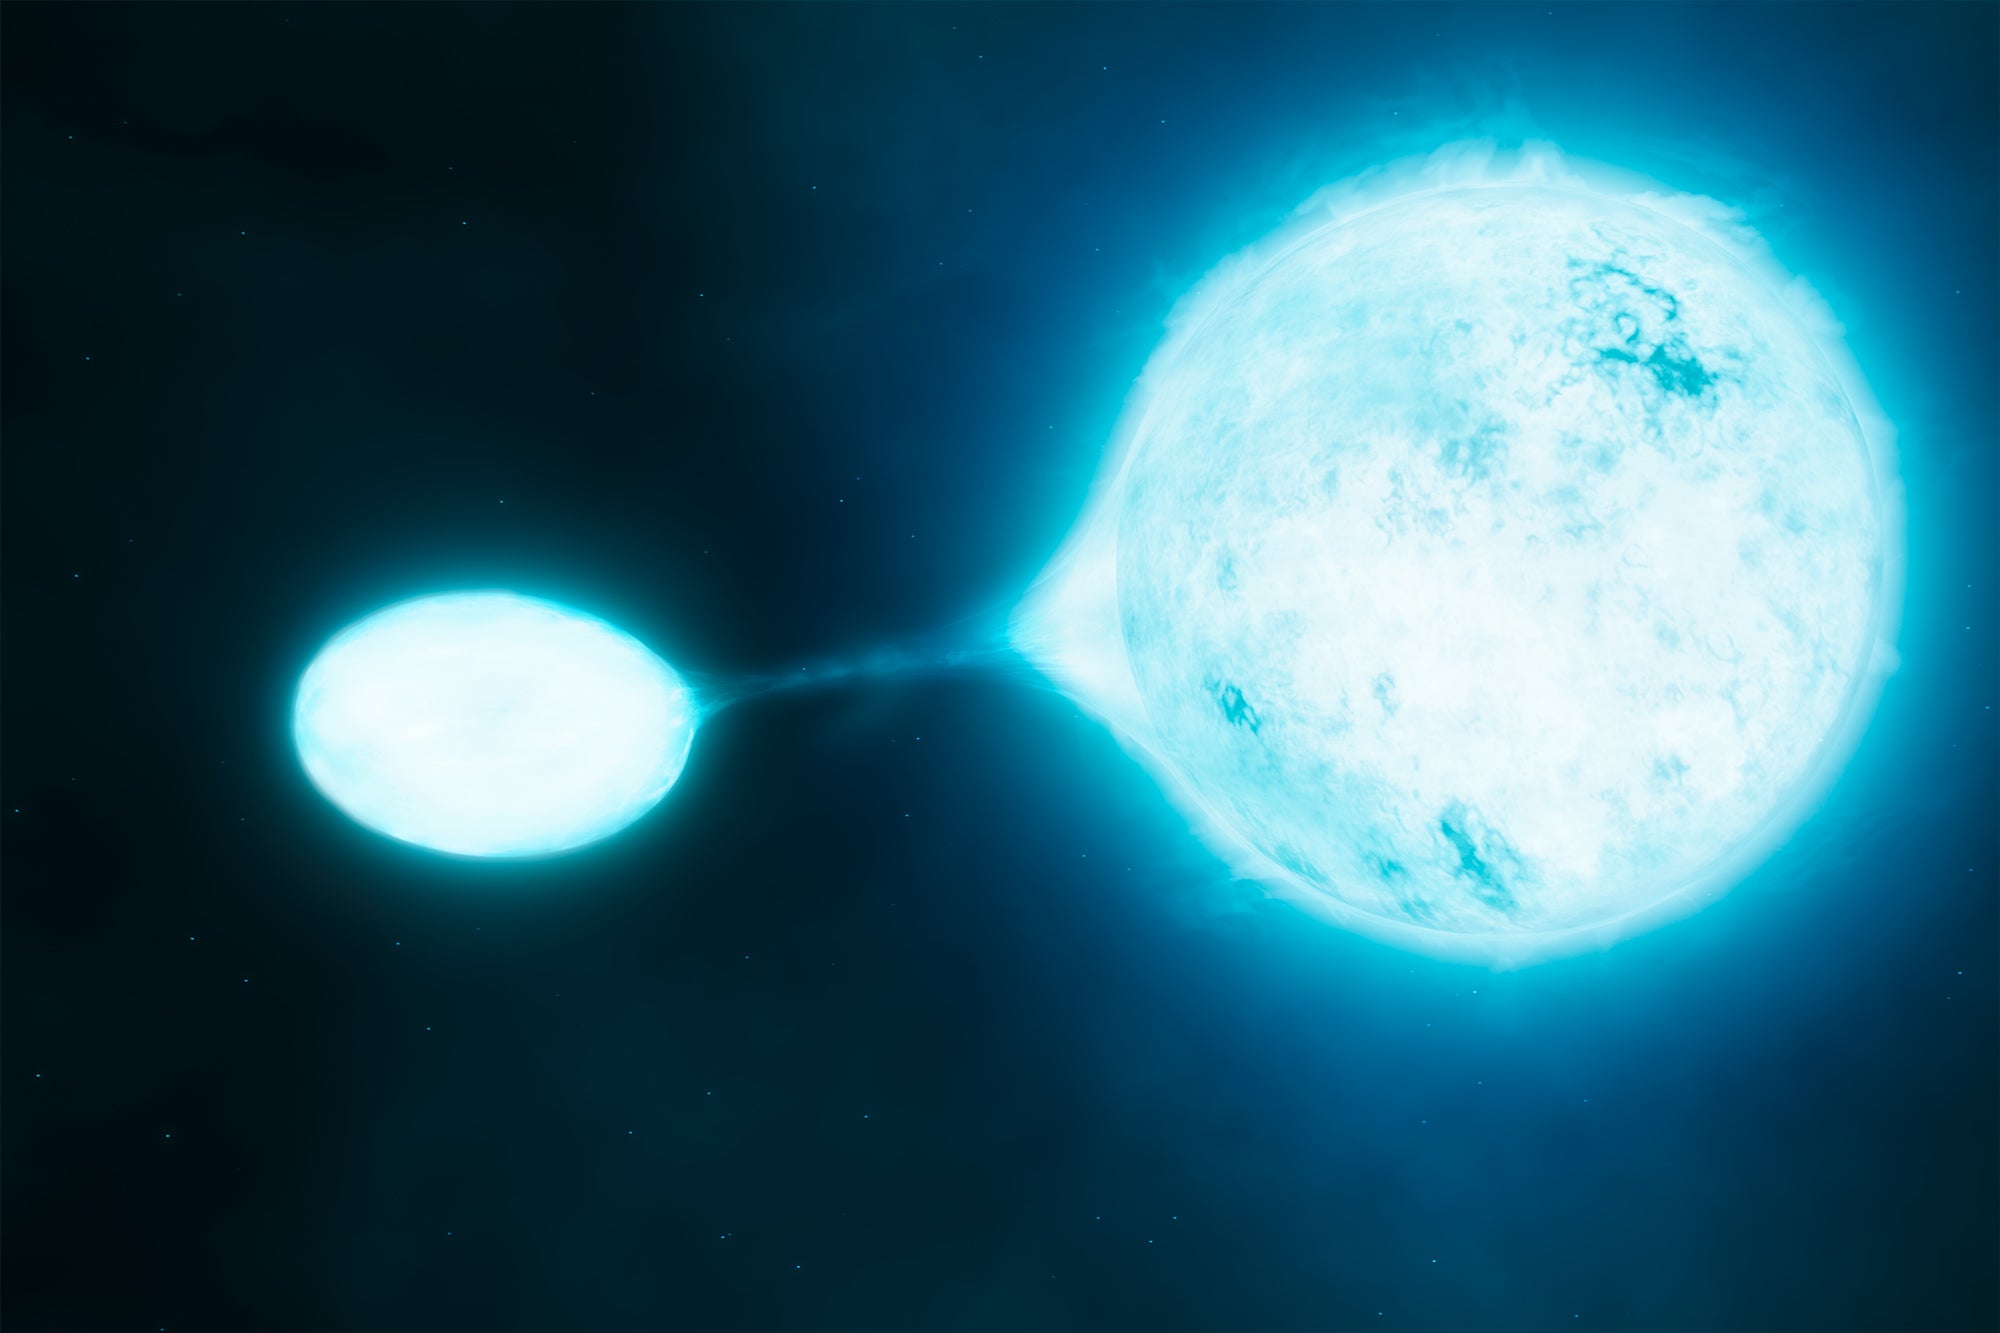 Artist’s impression of one star cannibalizing another.